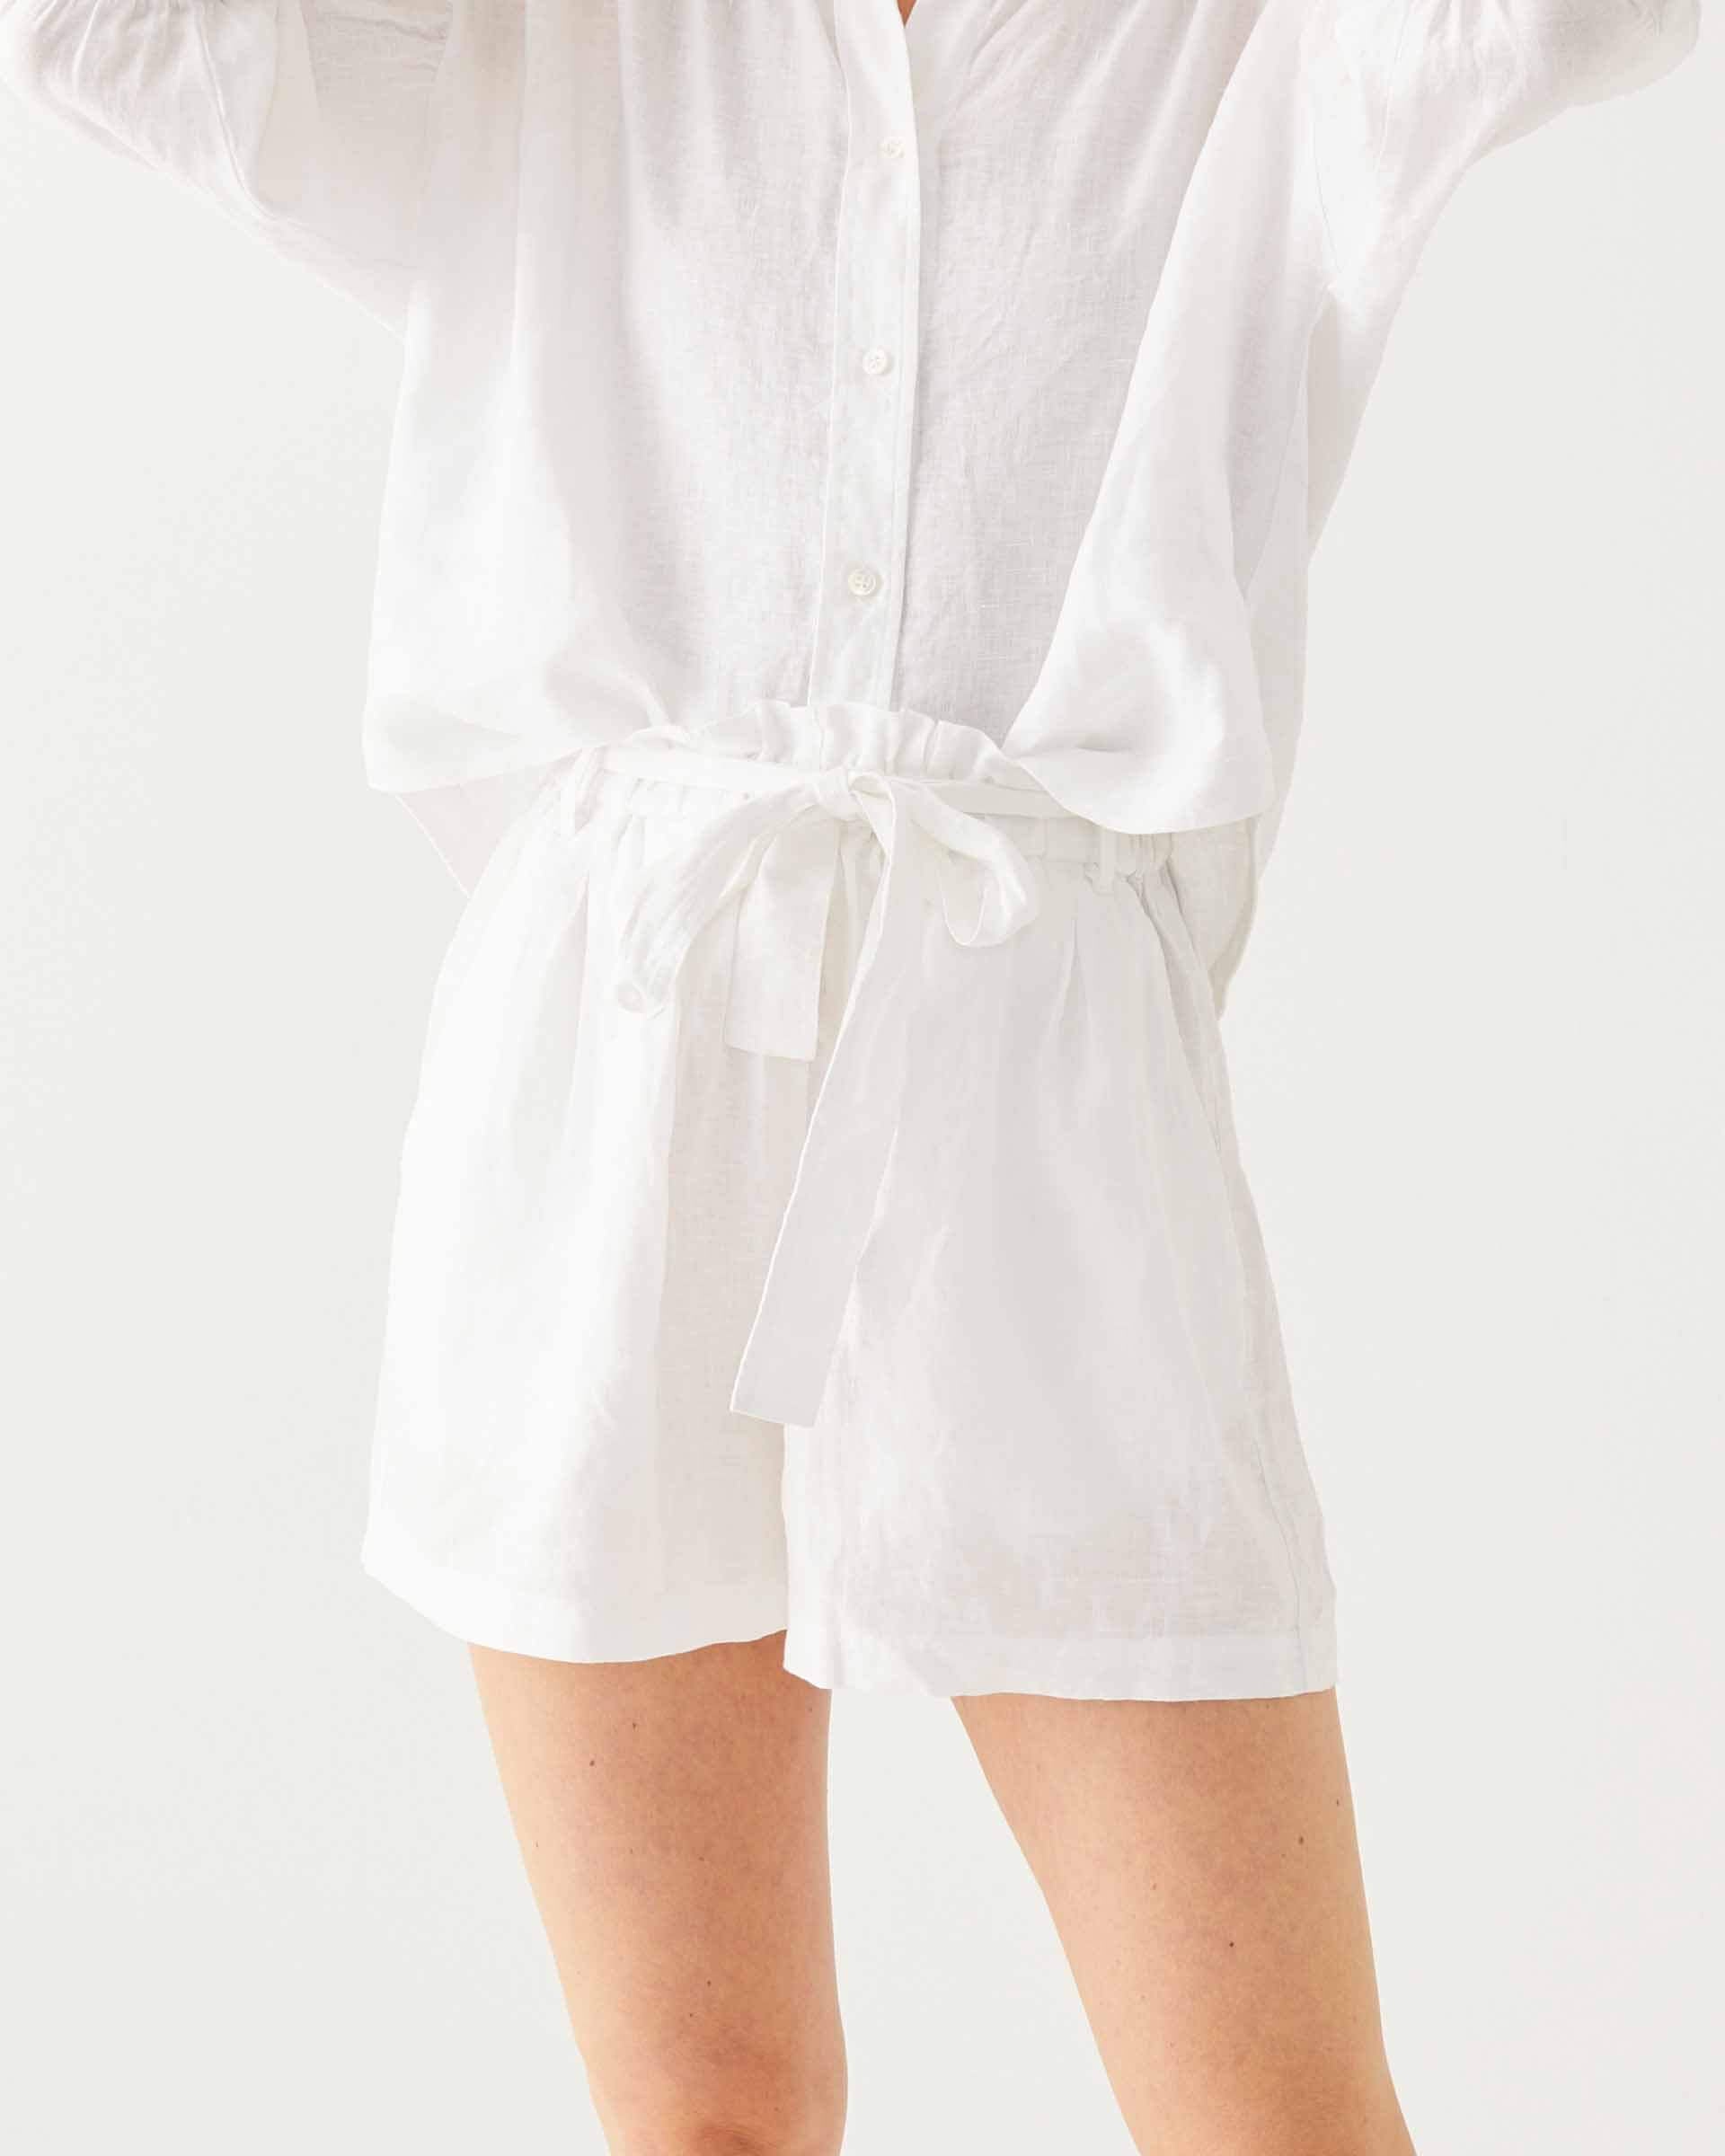 female wearing white linen shorts and matching top with self belt on a white background